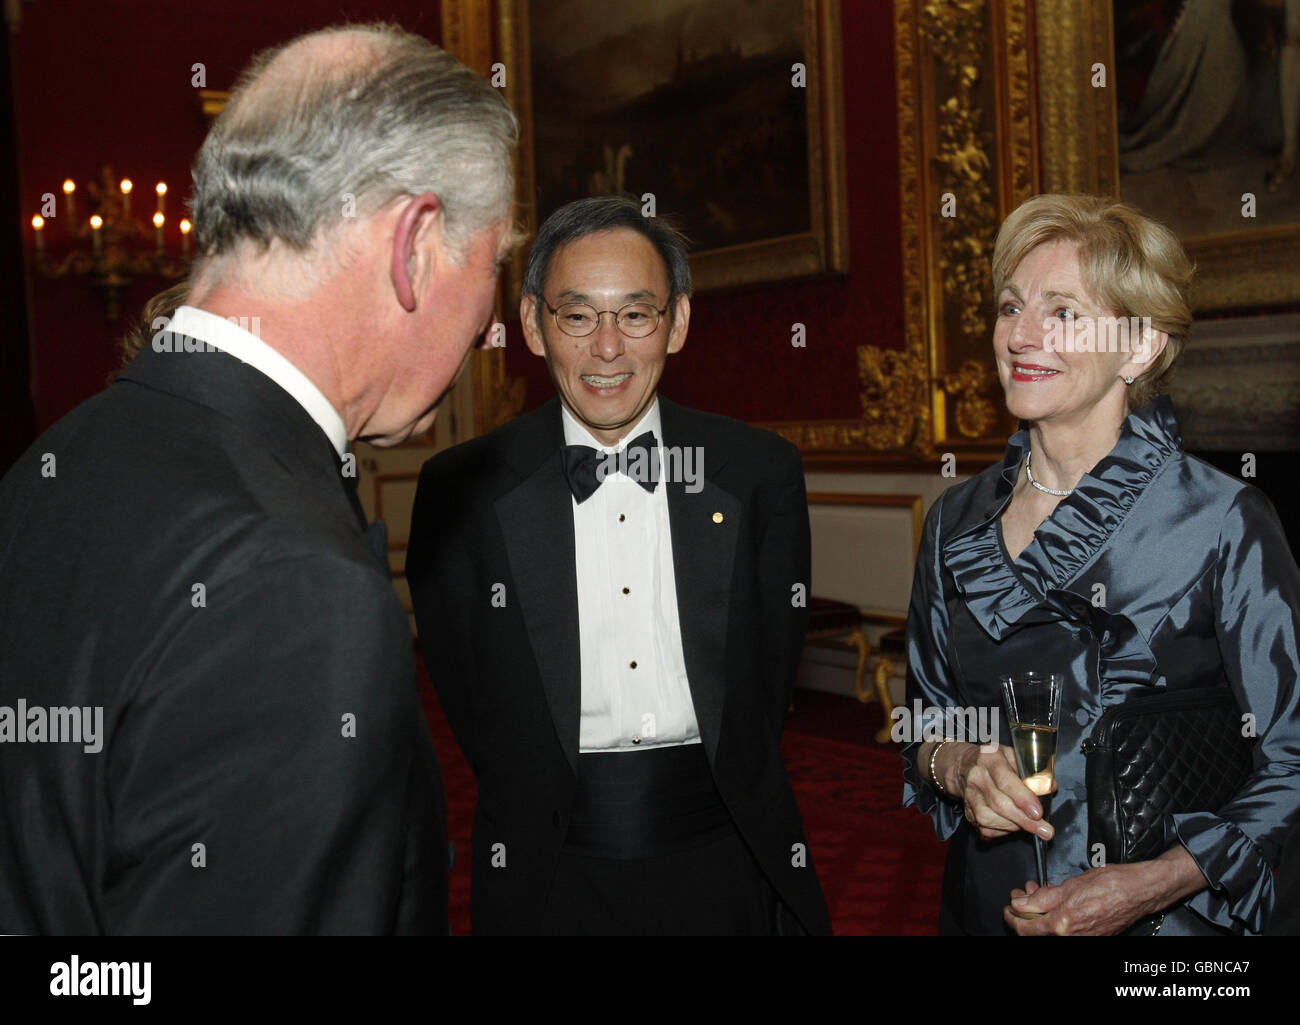 Britain's Prince Charles, the Prince of Wales (left) talks to unidentified guests, during a reception for Nobel Laureates and climate change experts, at St James's Palace in London, Stock Photo